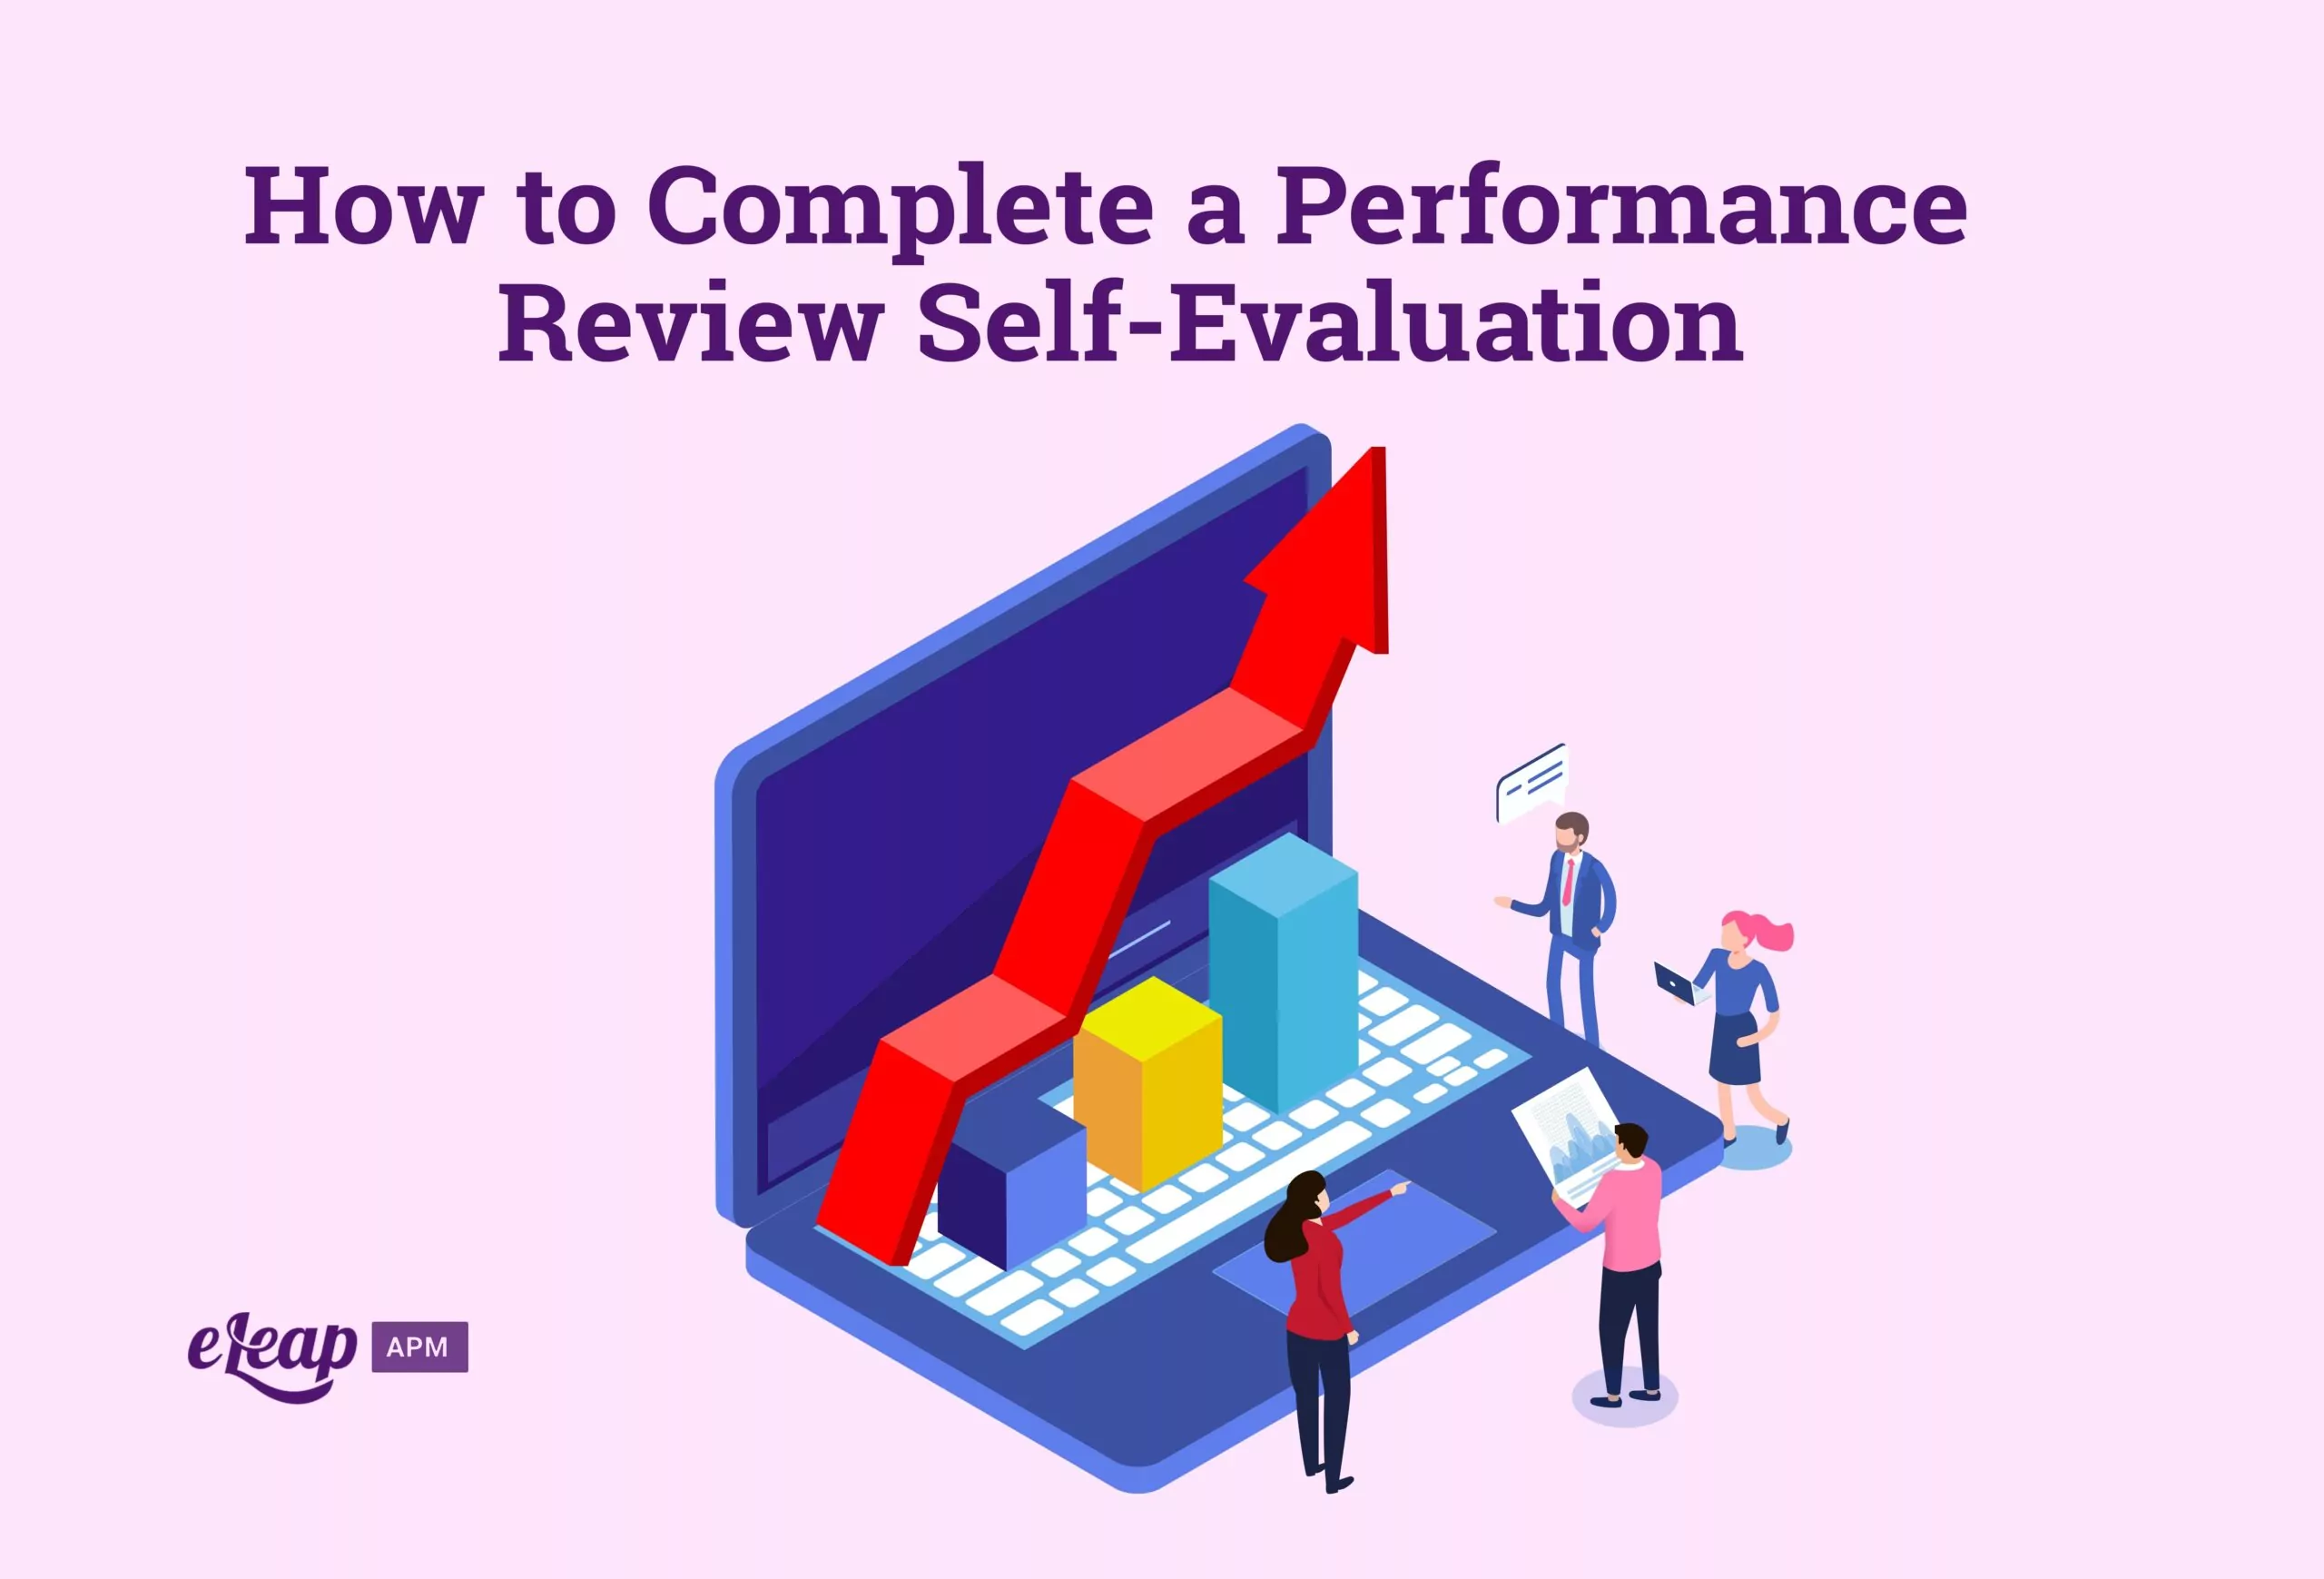 How to Complete a Performance Review Self-Evaluation